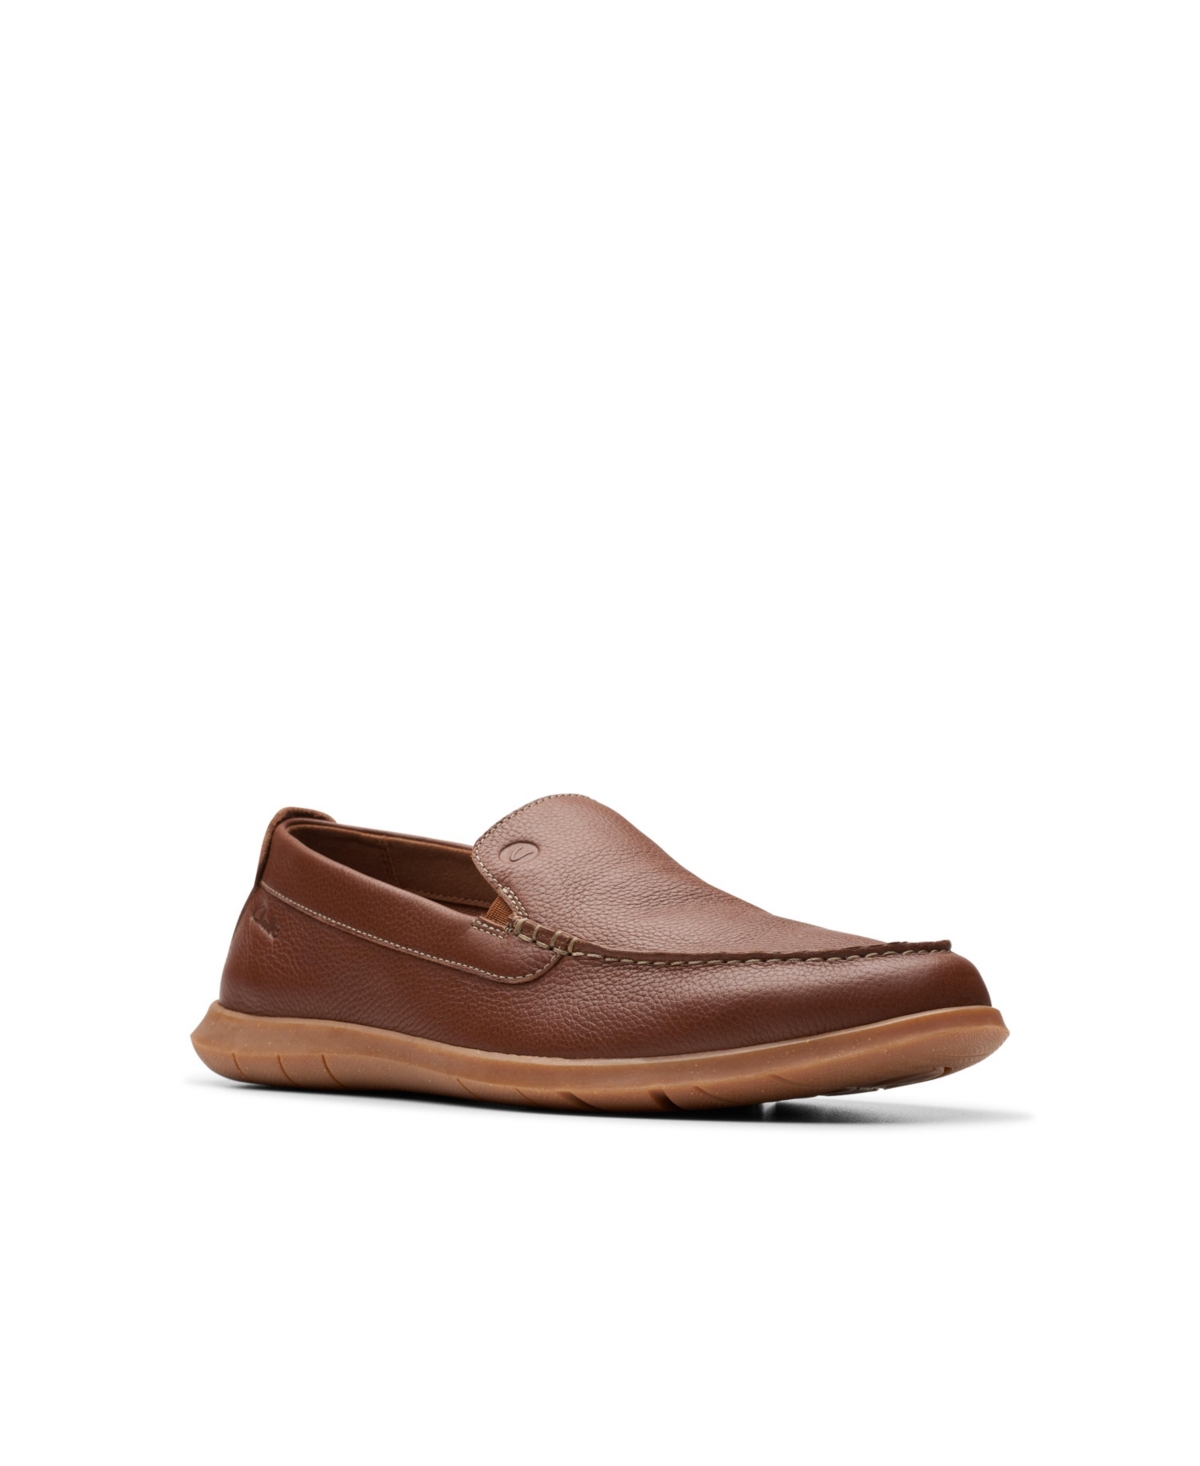 Men's Collection Flexway Step Slip On Shoes - Light Brown Leather